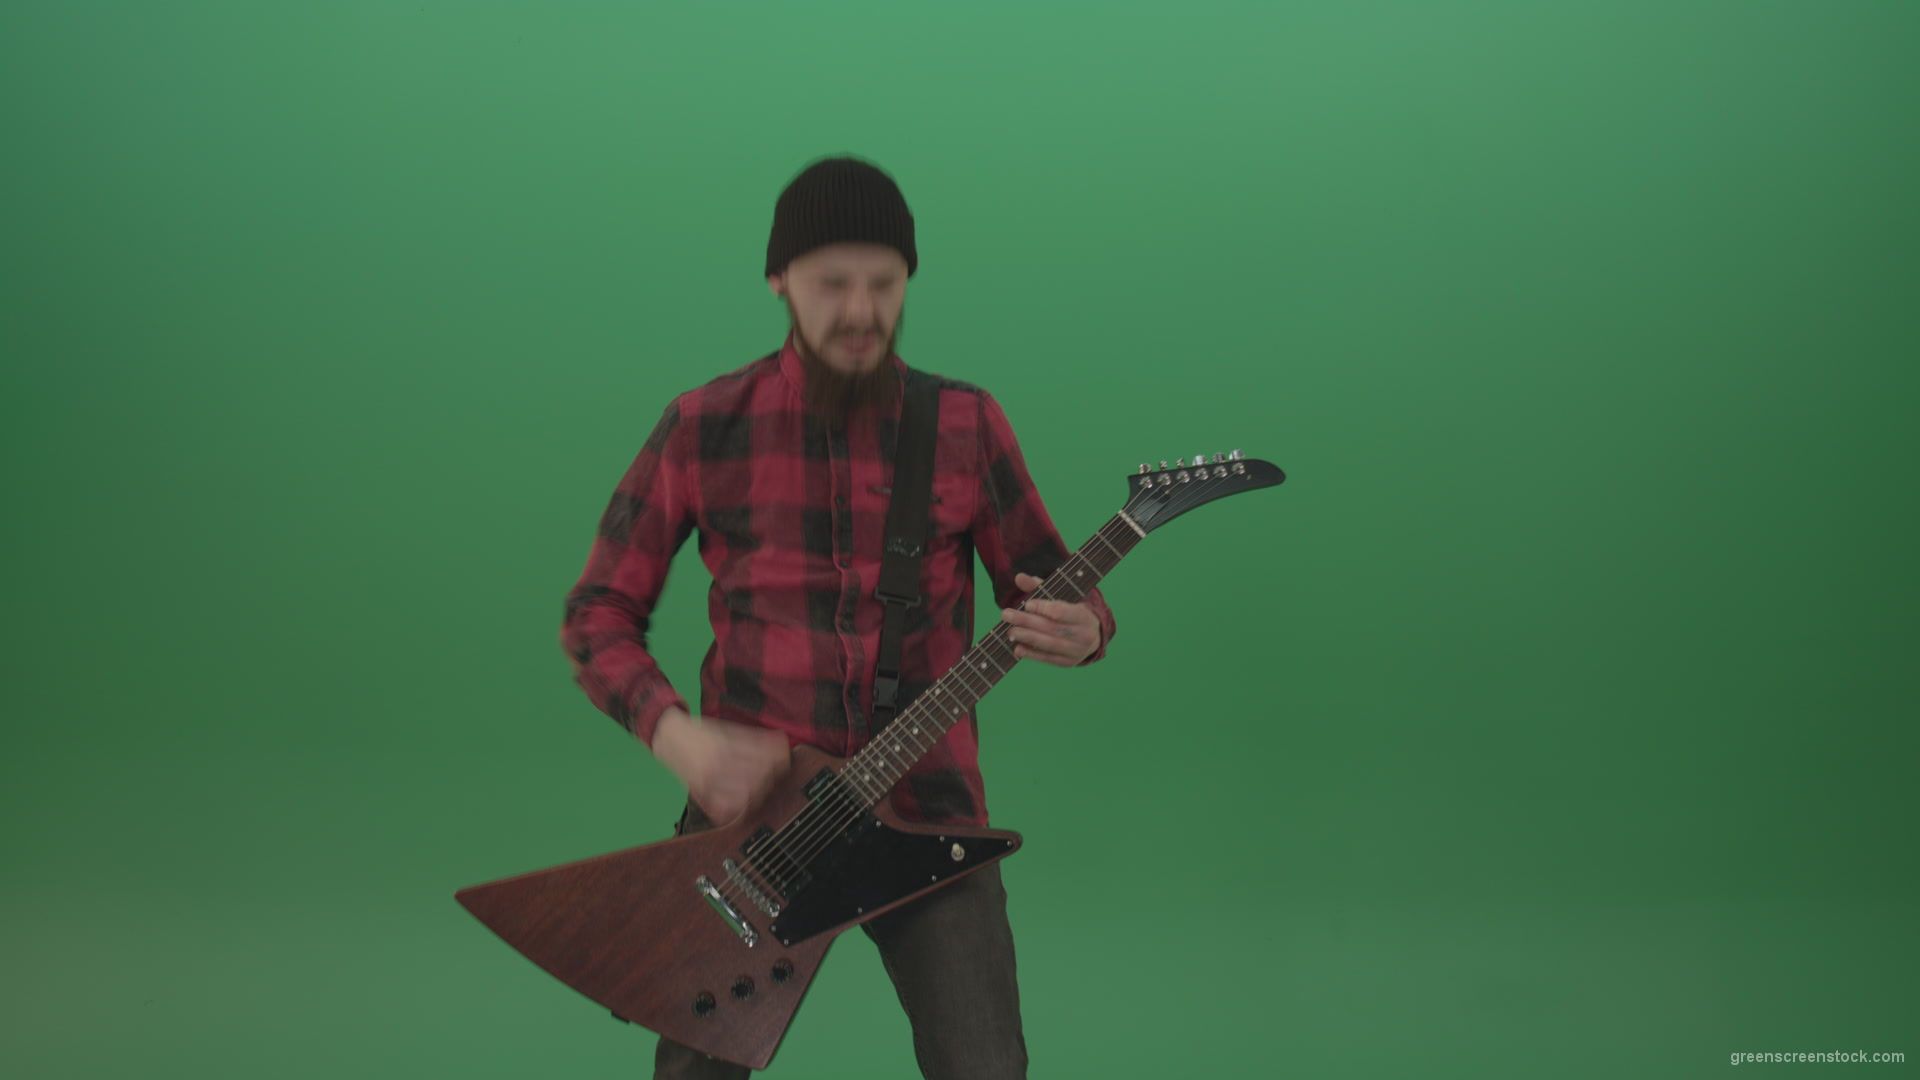 Old-man-with-beard-play-rock-guitar-isolated-on-green-screen-background-4K_005 Green Screen Stock